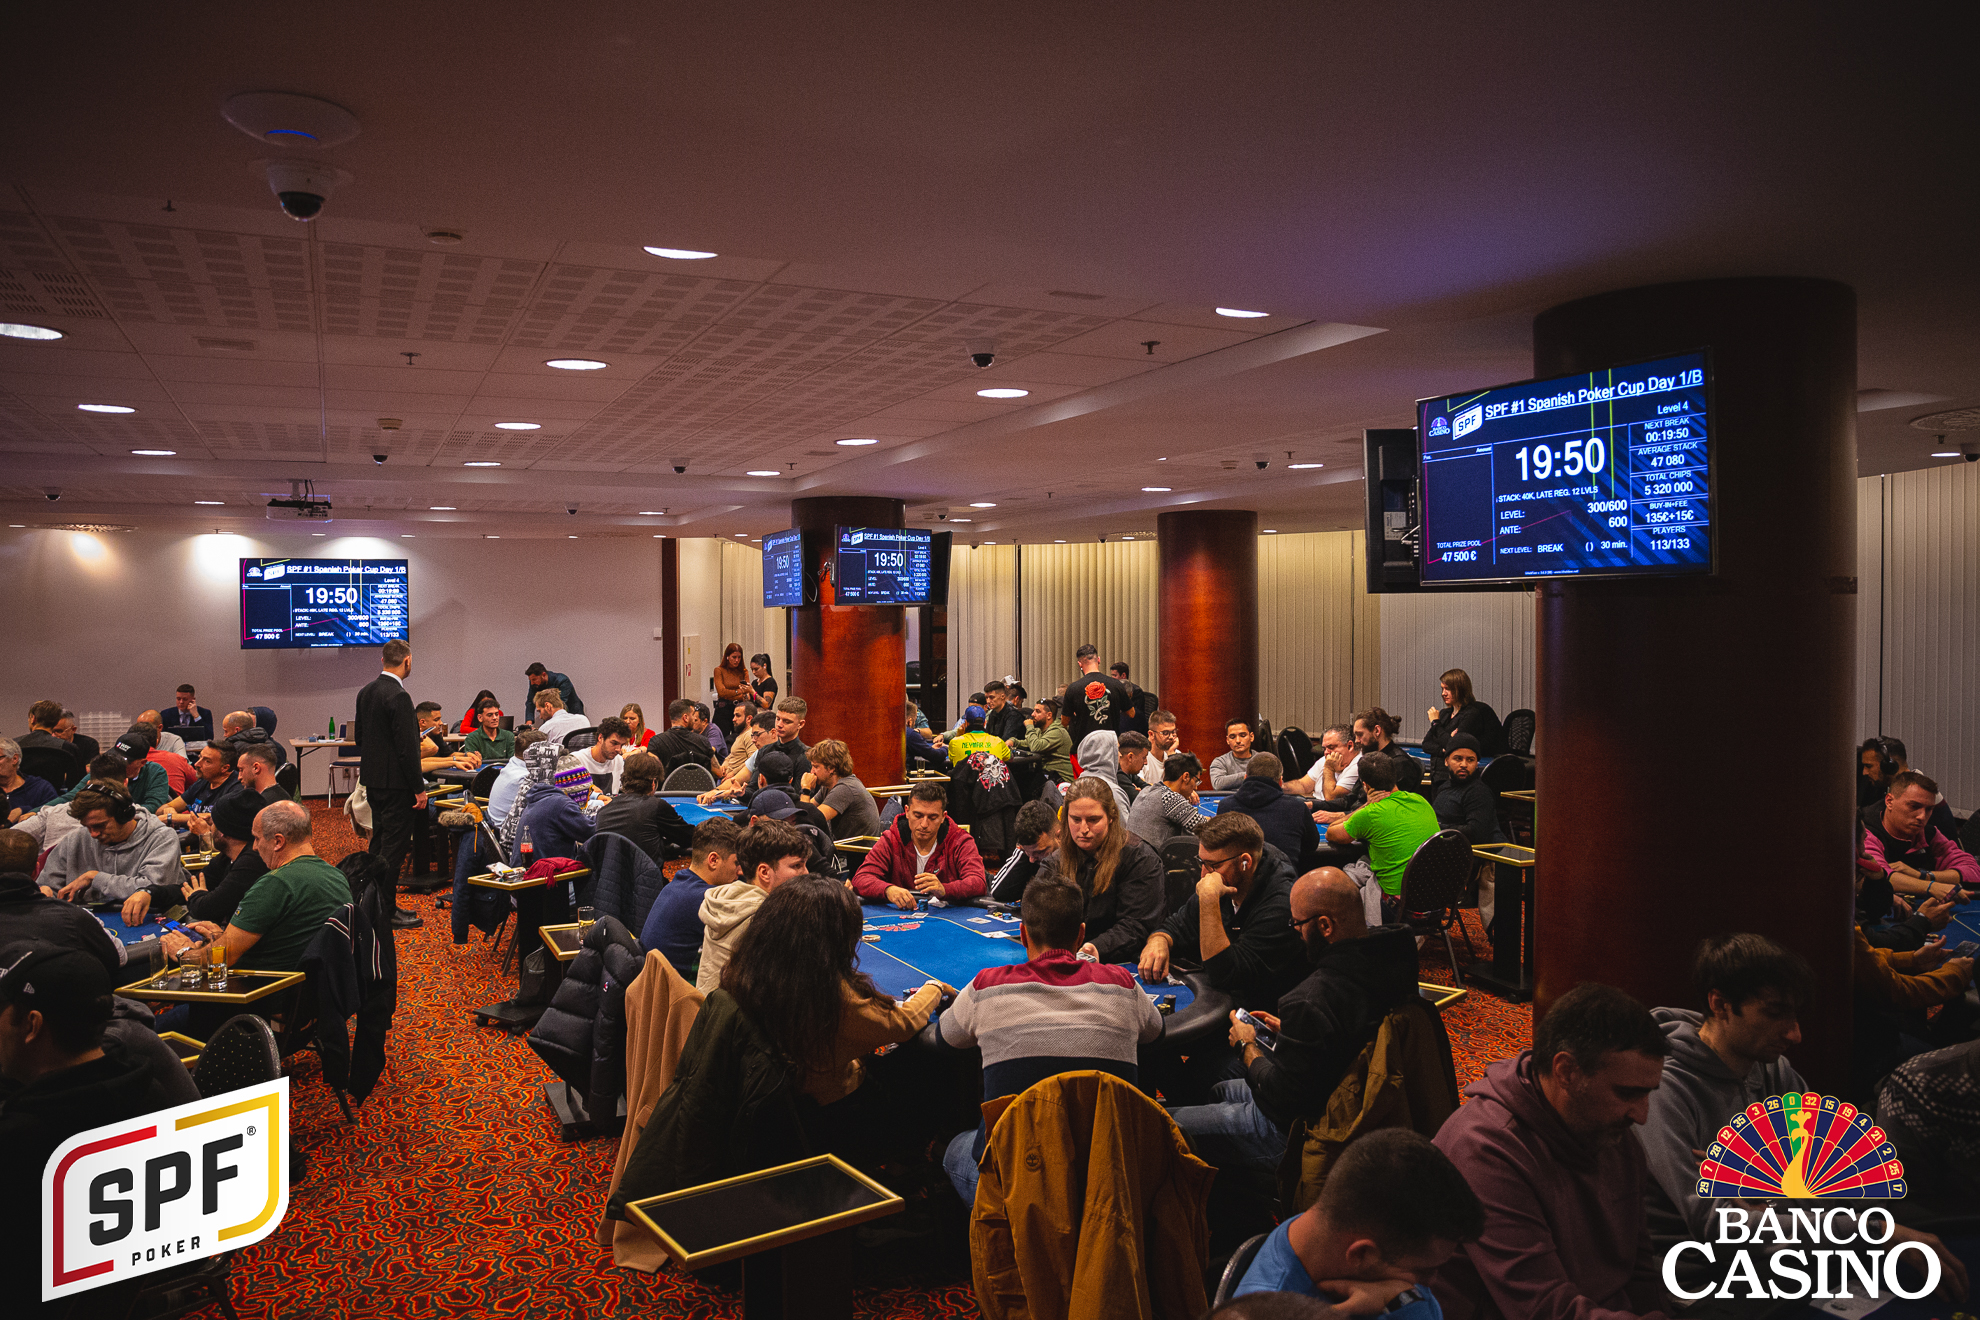 THE SPANISH POKER CUP 50,000€ GTD IS GOING TO THE FINALS AND THE SPF MAIN EVENT 300,000€ GTD STARTS TODAY ON THE OPENING DAY!